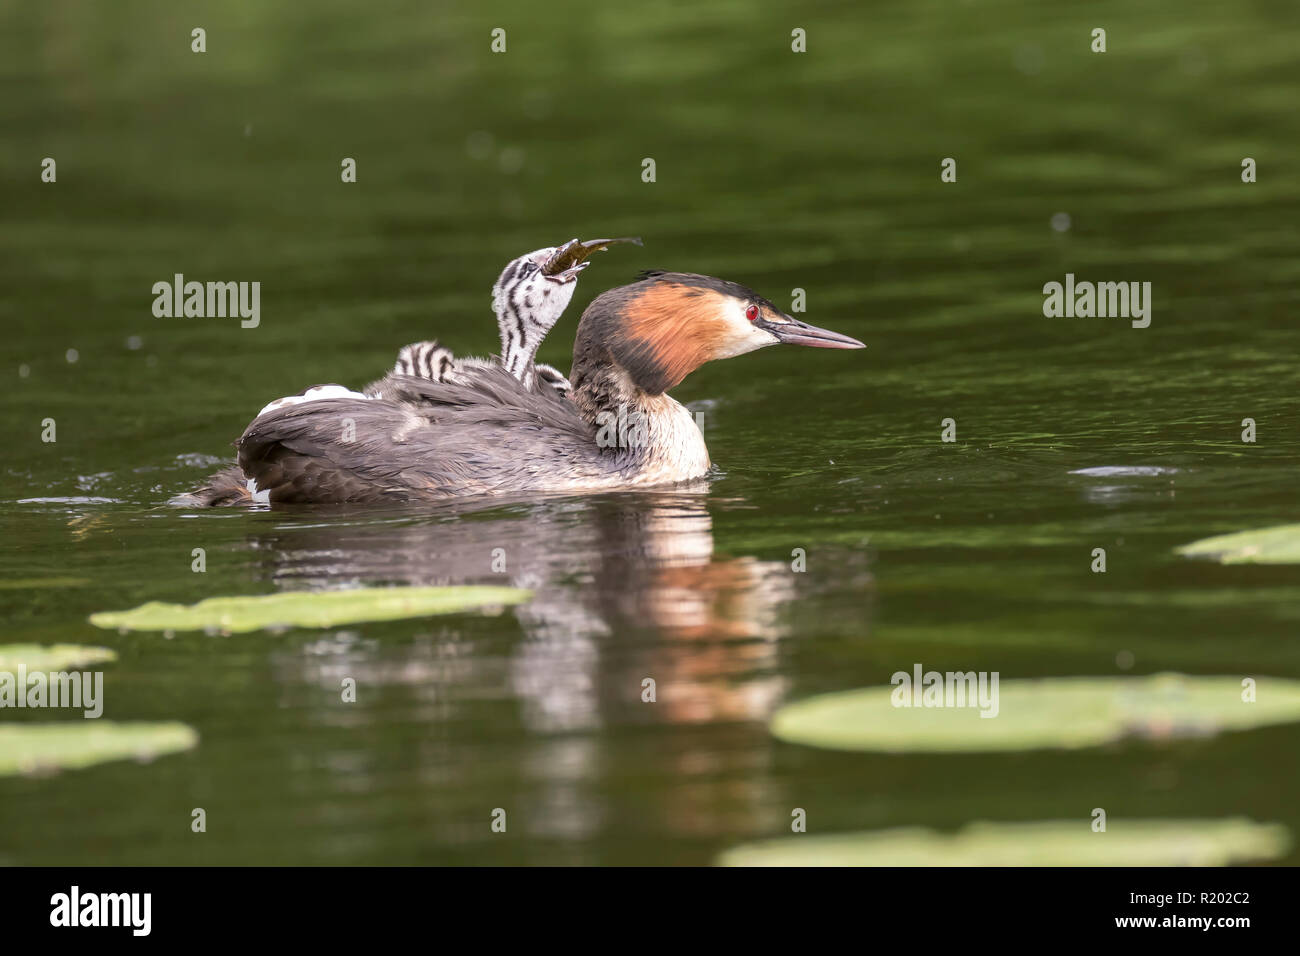 Great Crested Grebe (Podiceps cristatus). Adult swimming with chick on the back, which is trying to eat a fish. Germany. Stock Photo